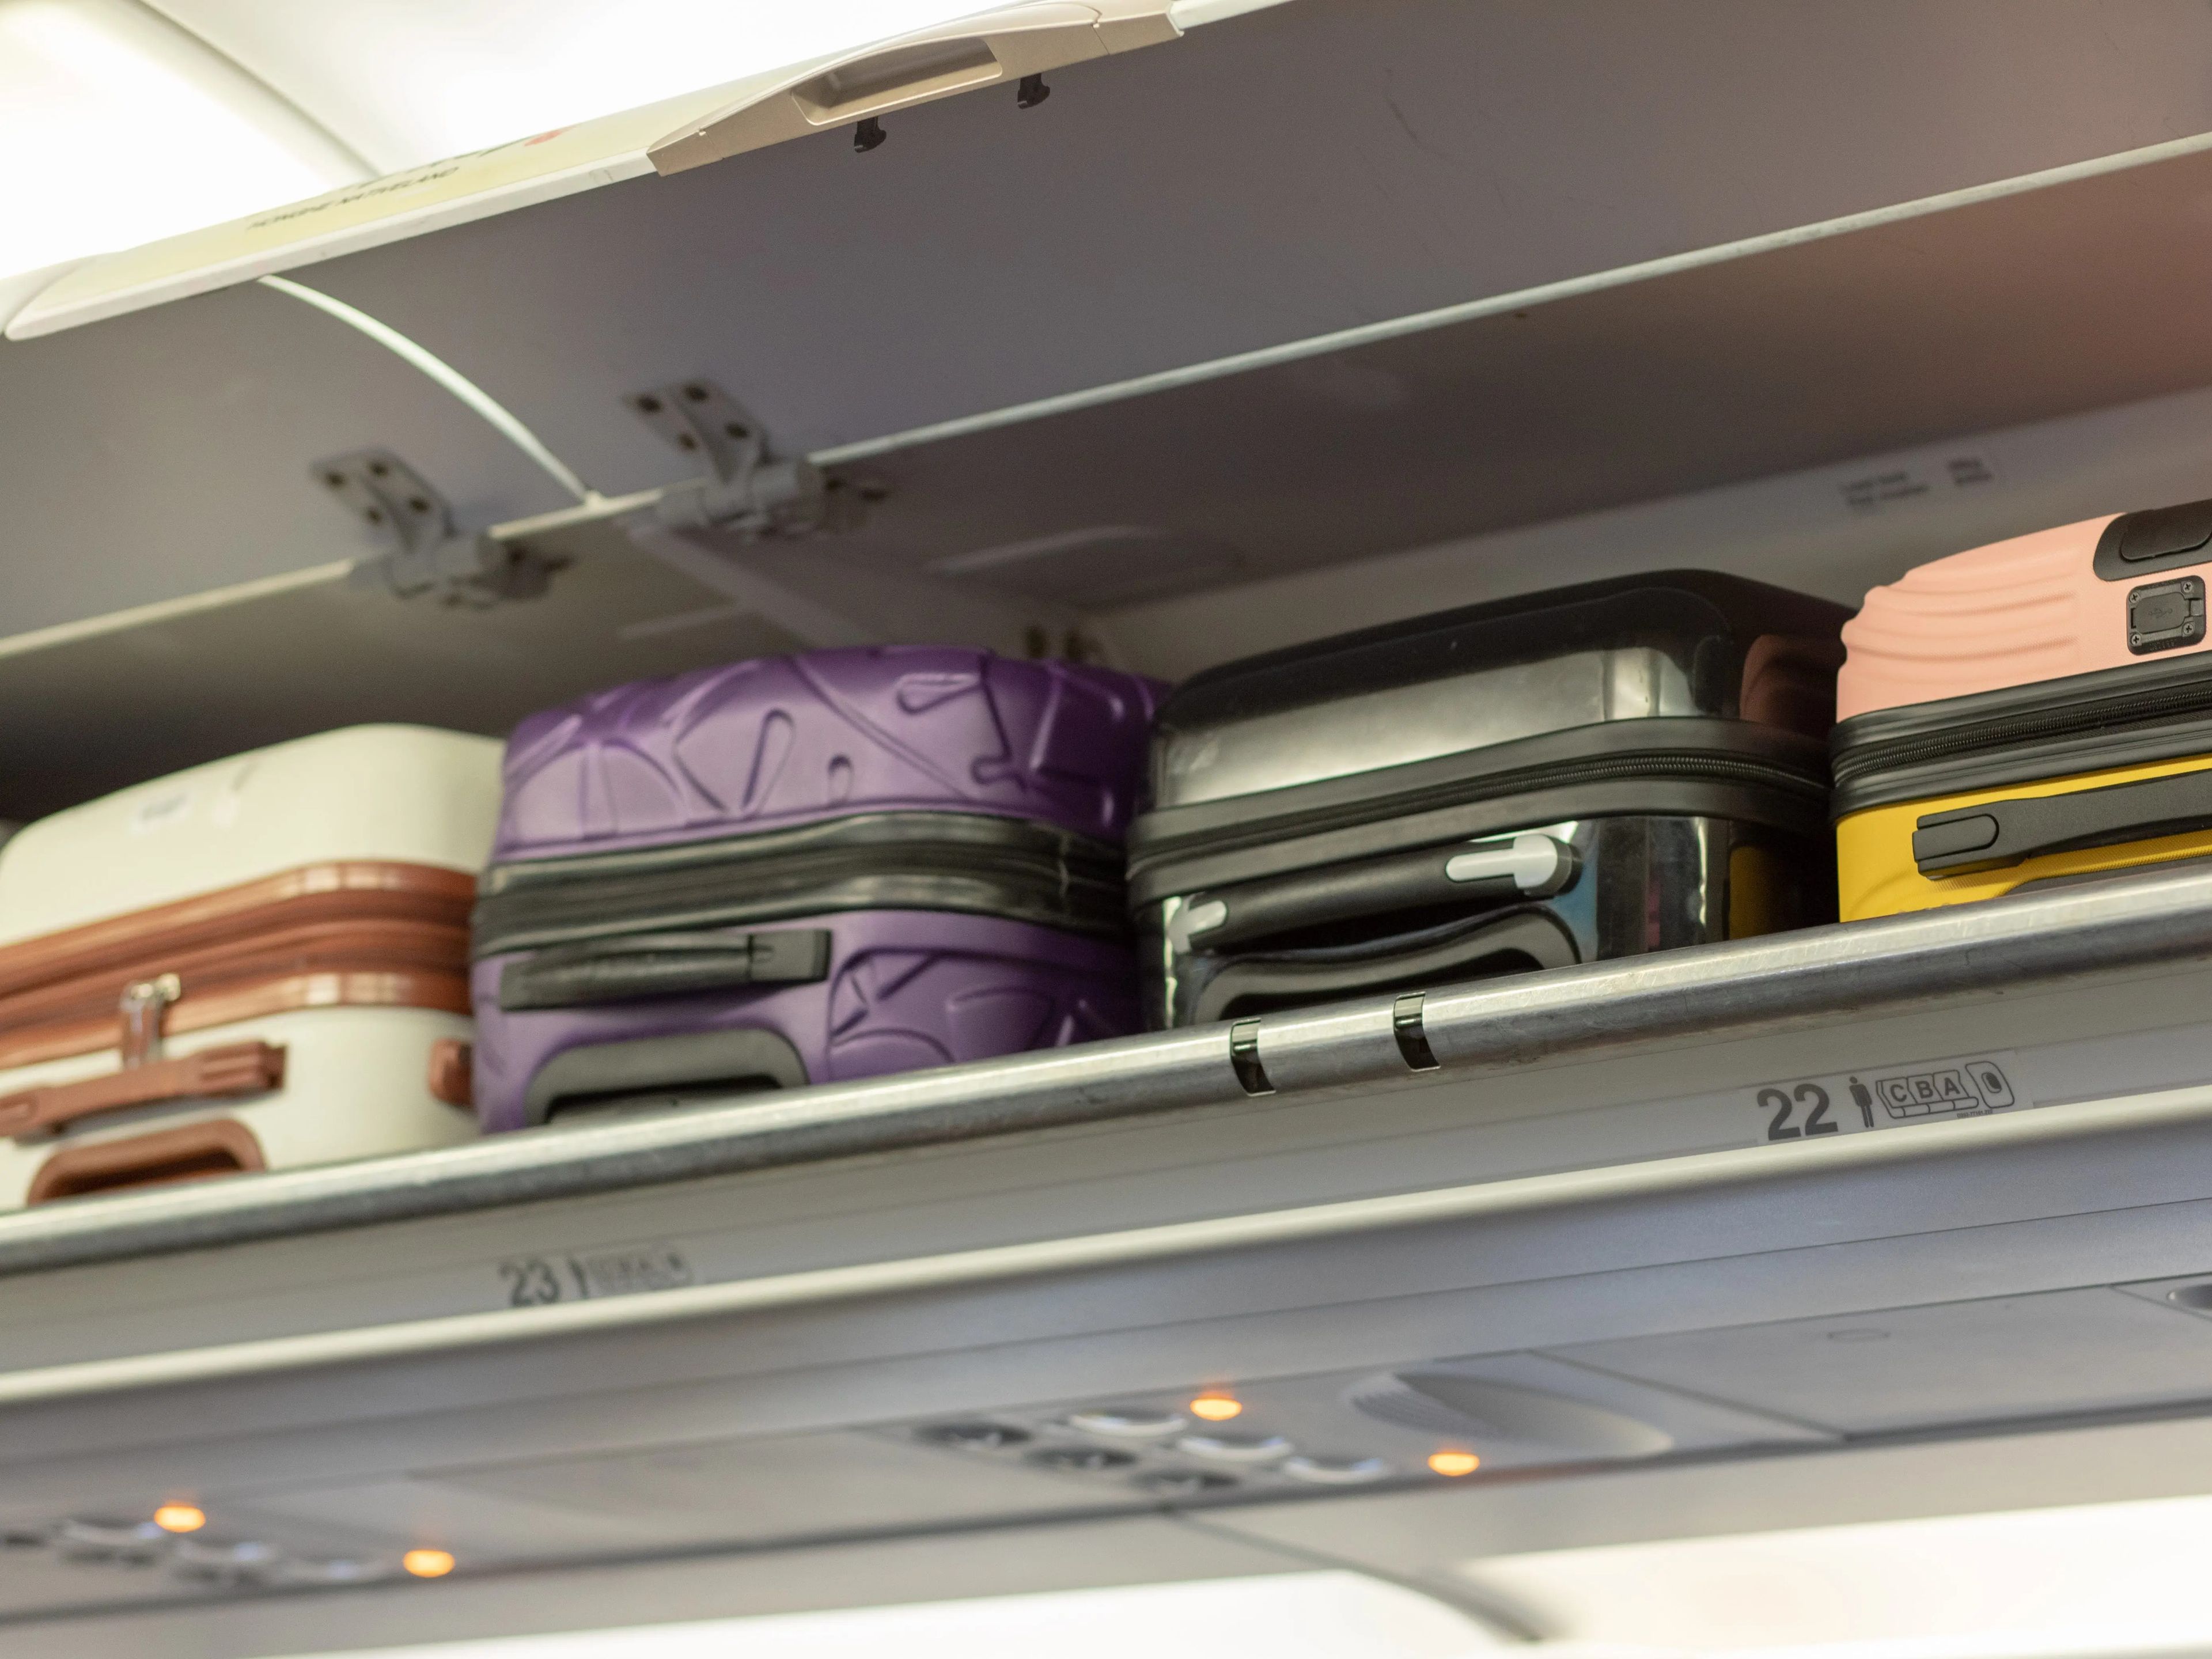 Luggage in the overhead bin on a plane.